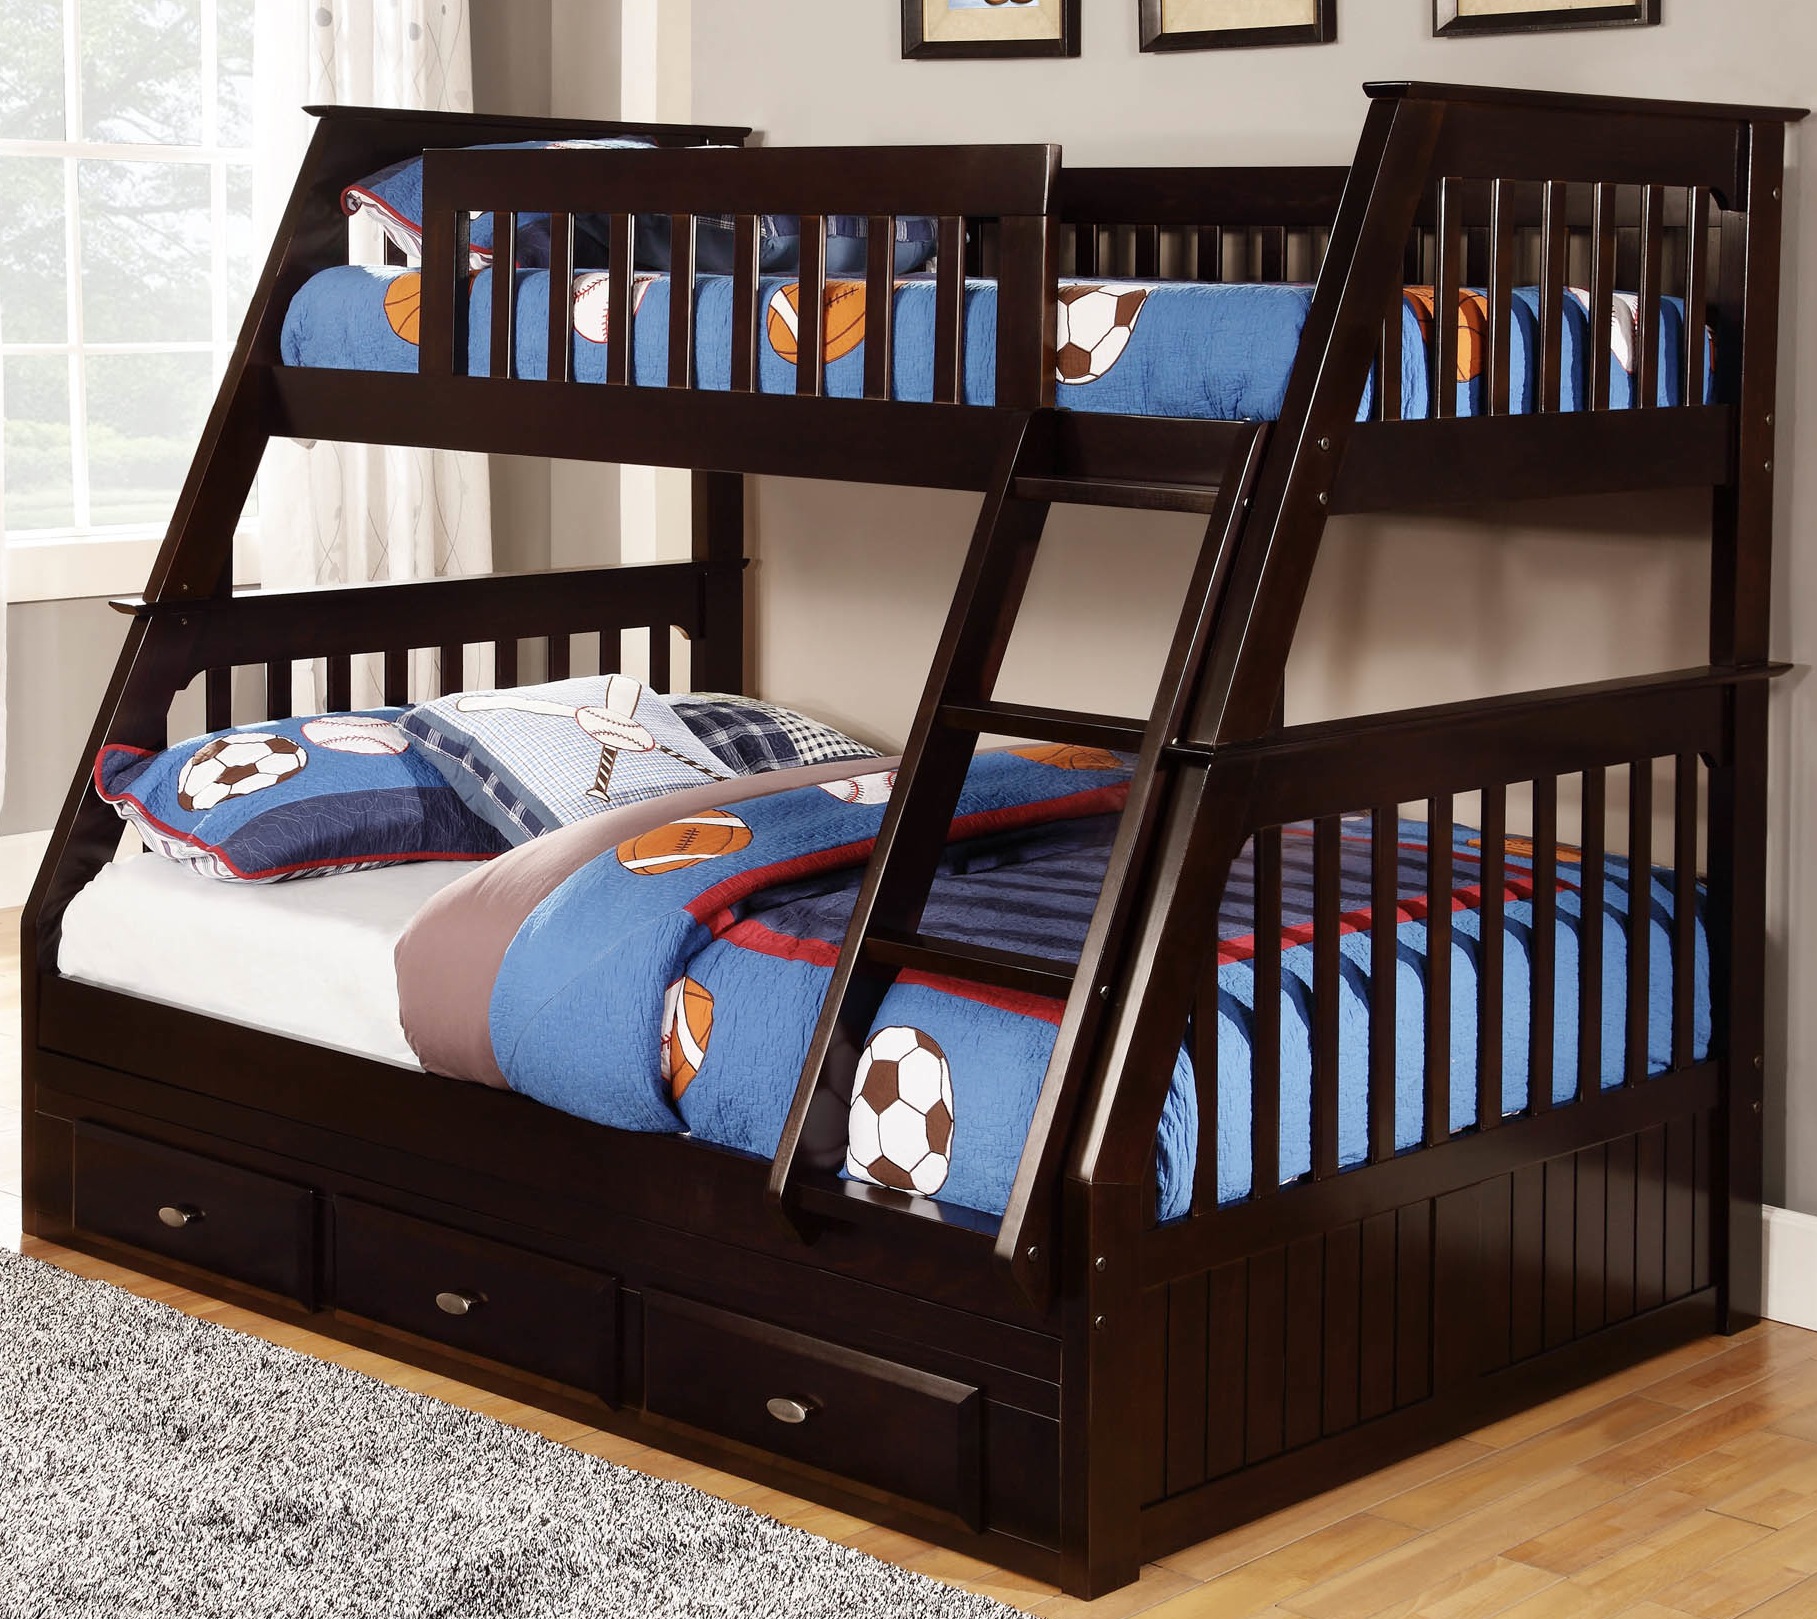 Espresso Mission Bunk Bed Kfs S, Twin Over Full Bunk Bed Bedding